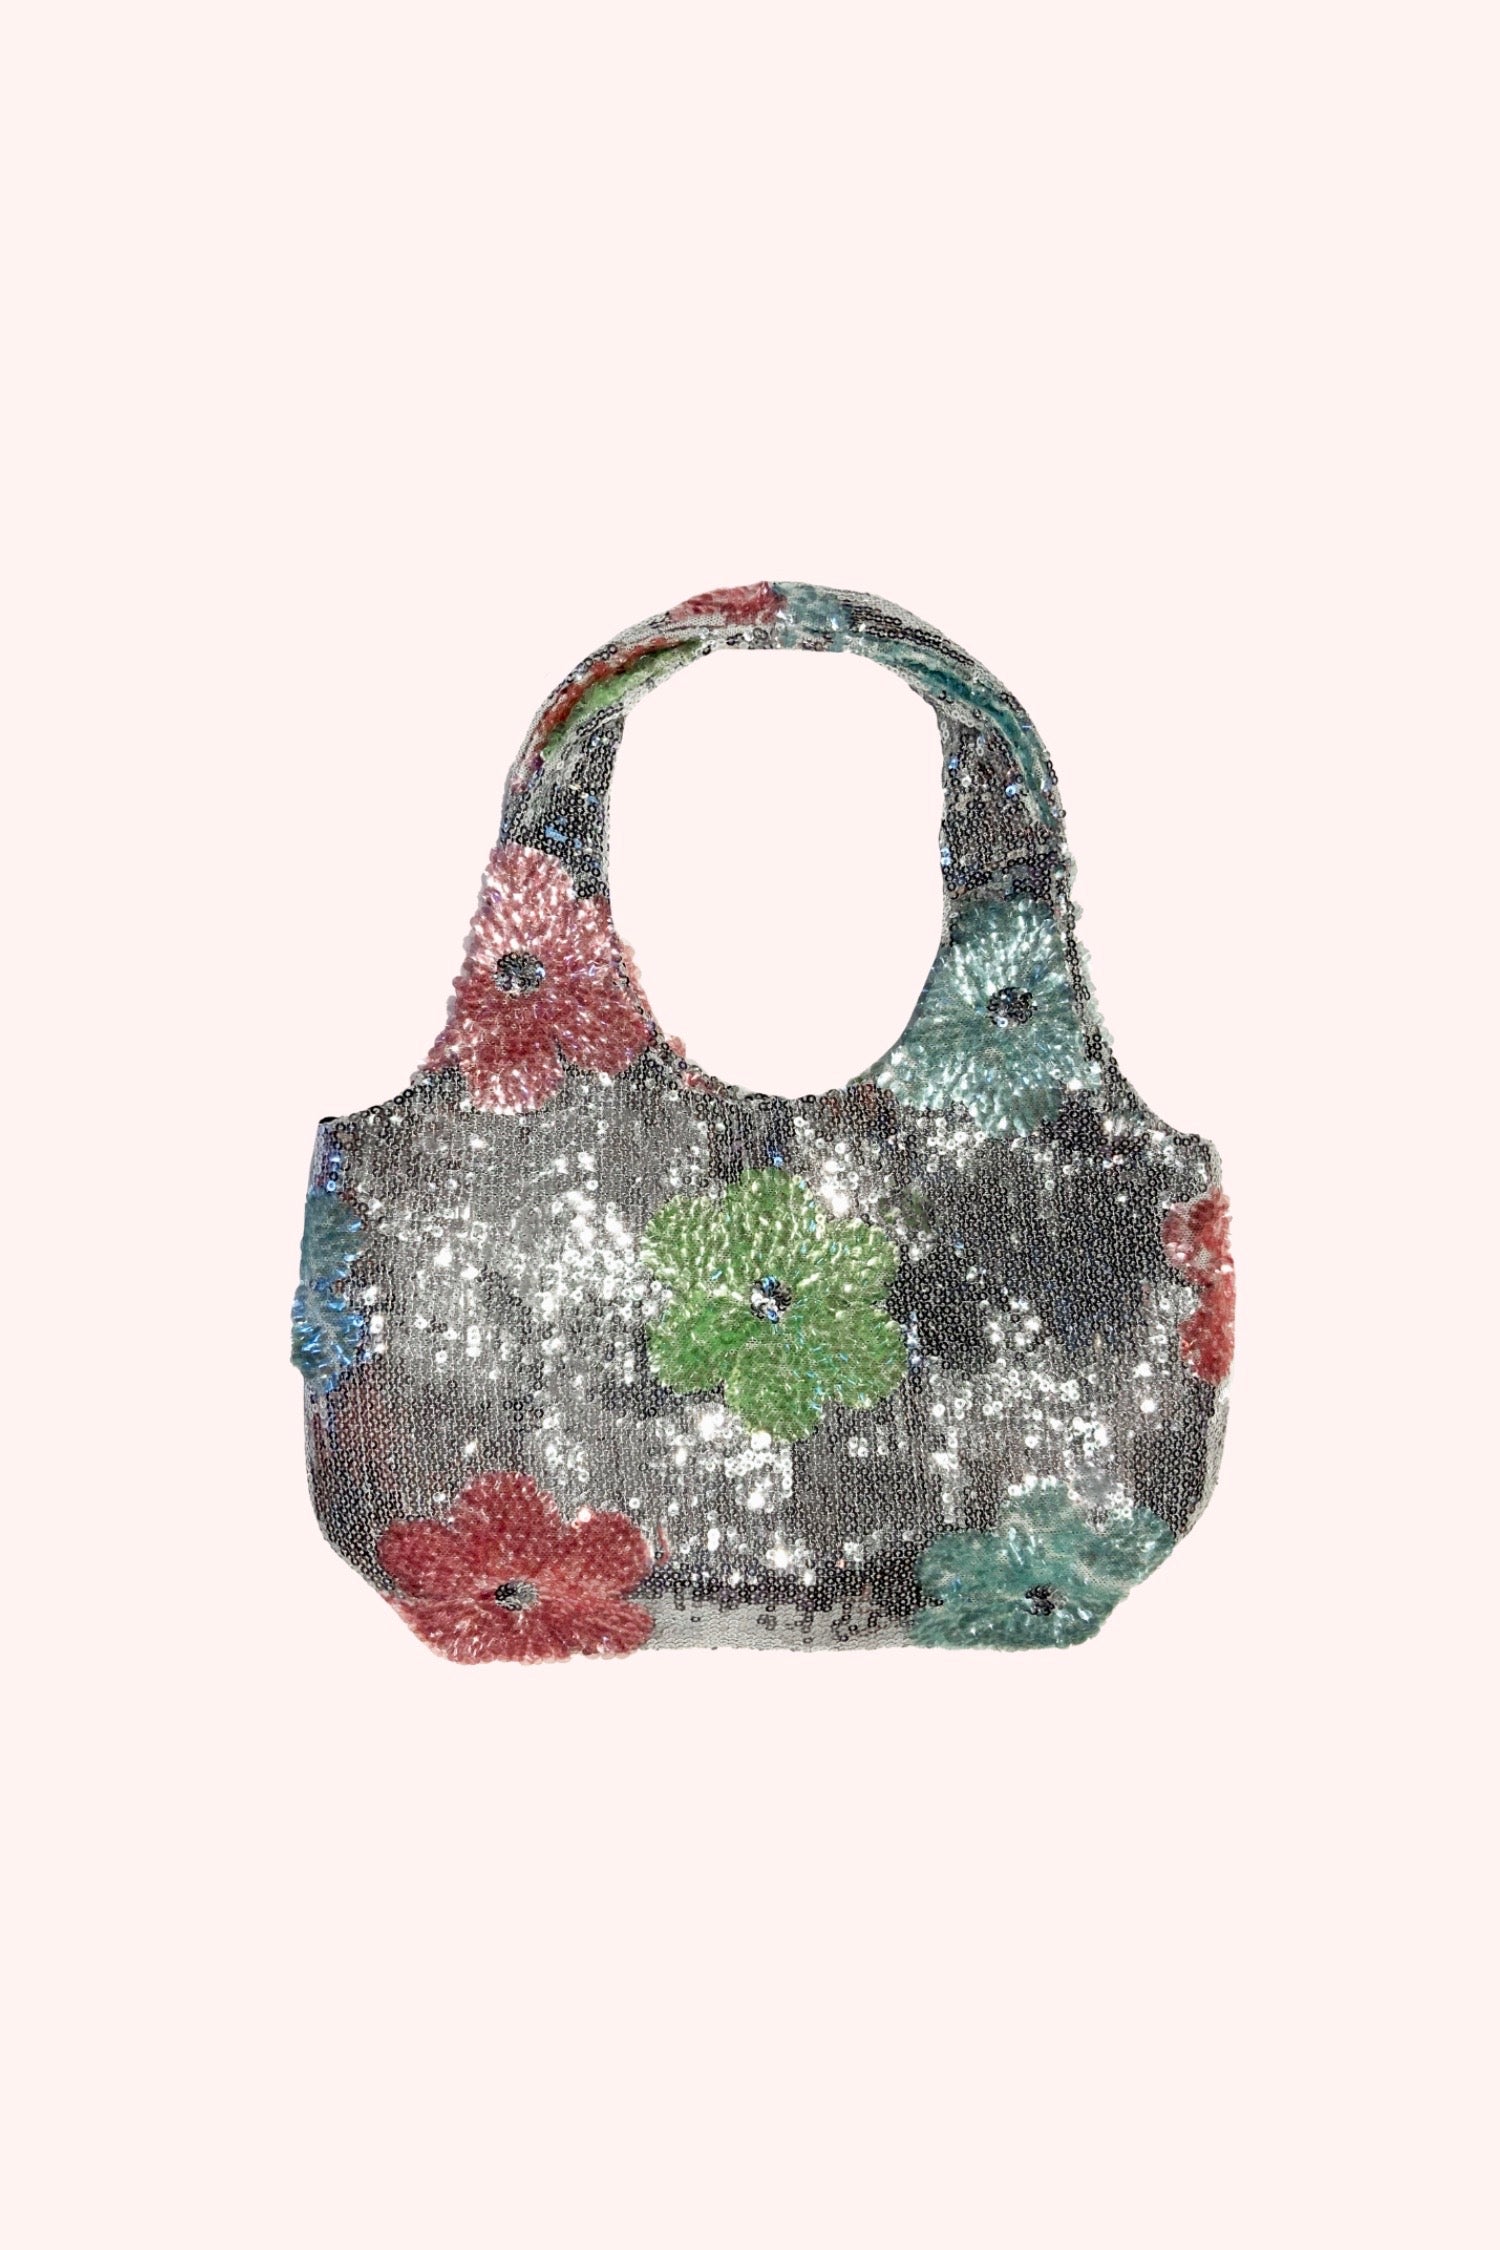 Pastel Posies Sequin Mini Bag, grey with floral design, blue, red, and green, rectangle shape